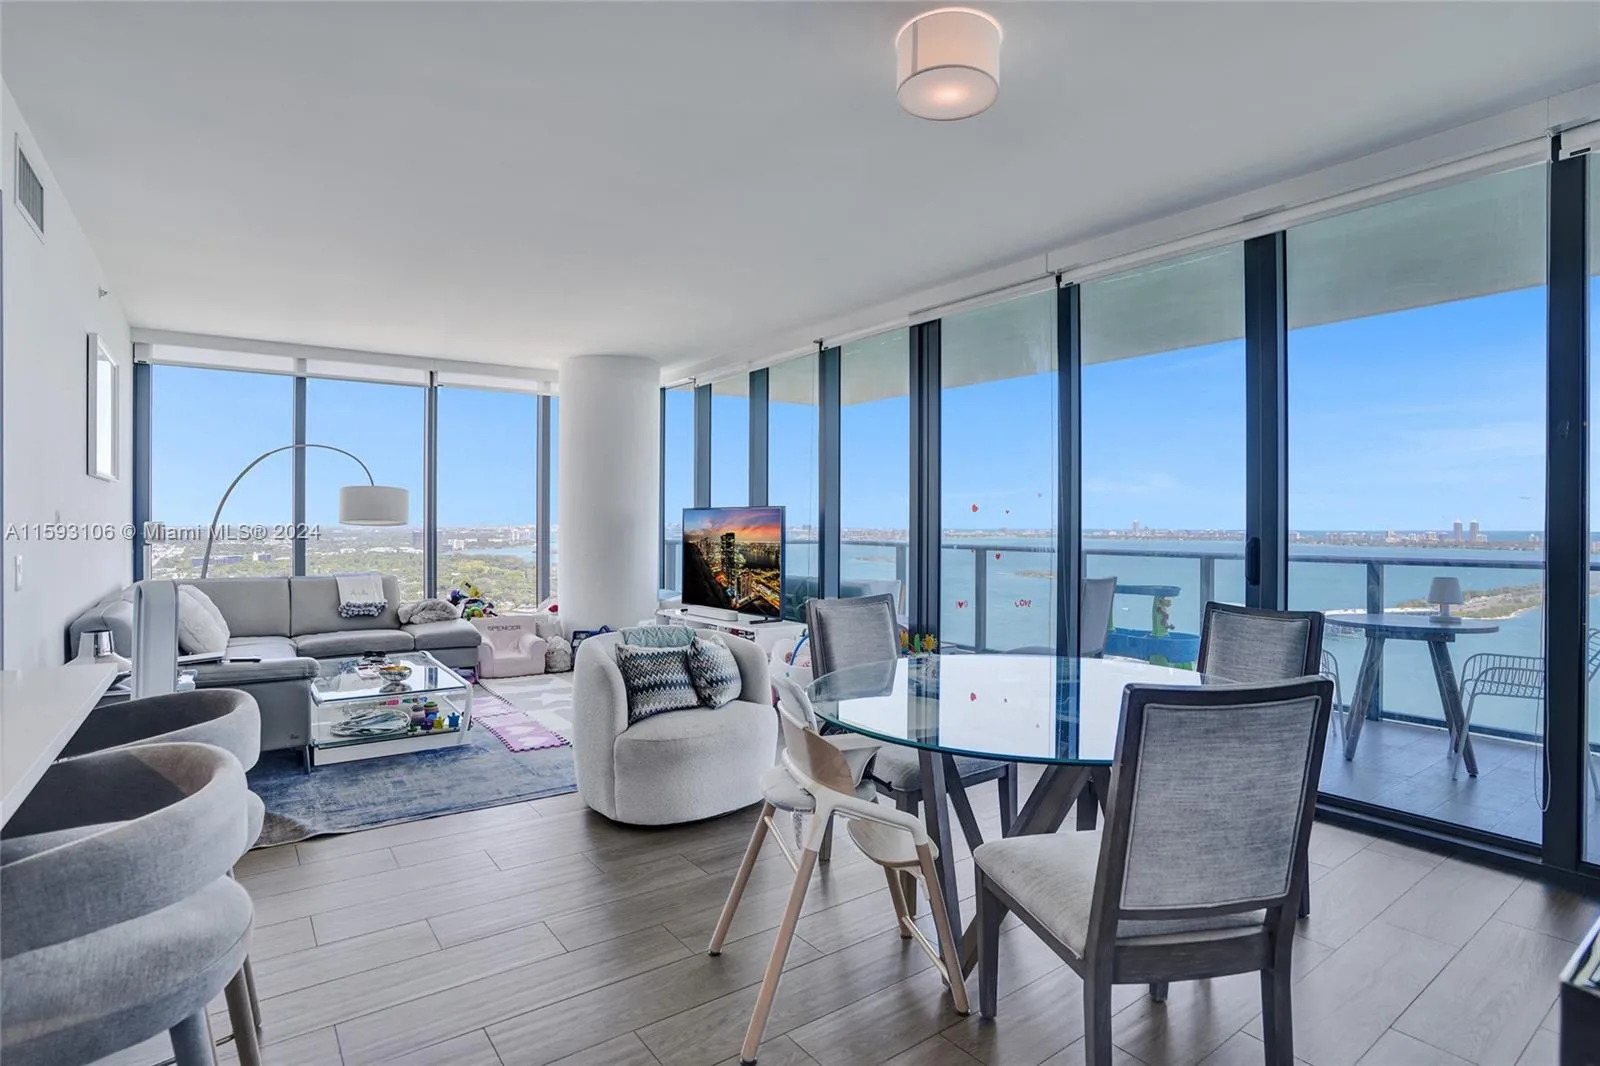 One of the best views Miami has to offer and you can see it from your living room!